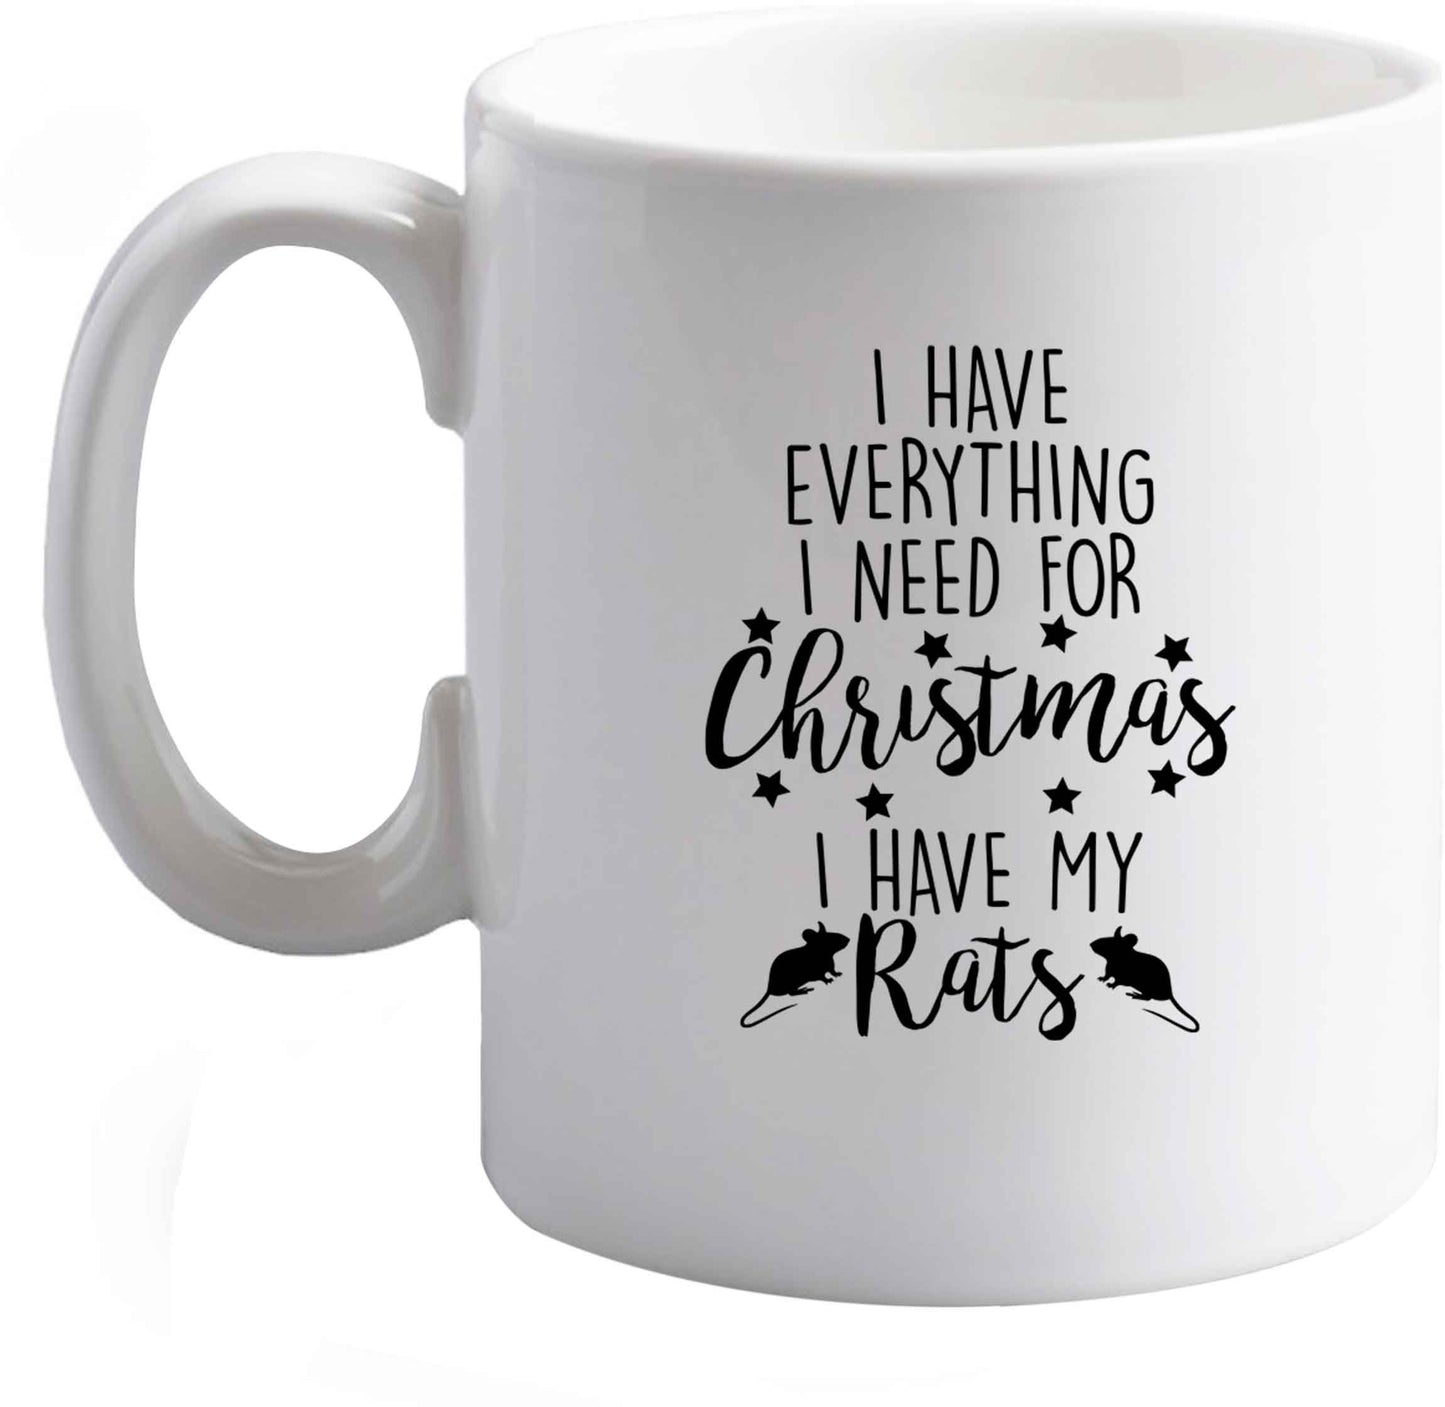 10 oz I have everything I need for Christmas I have my rats ceramic mug right handed